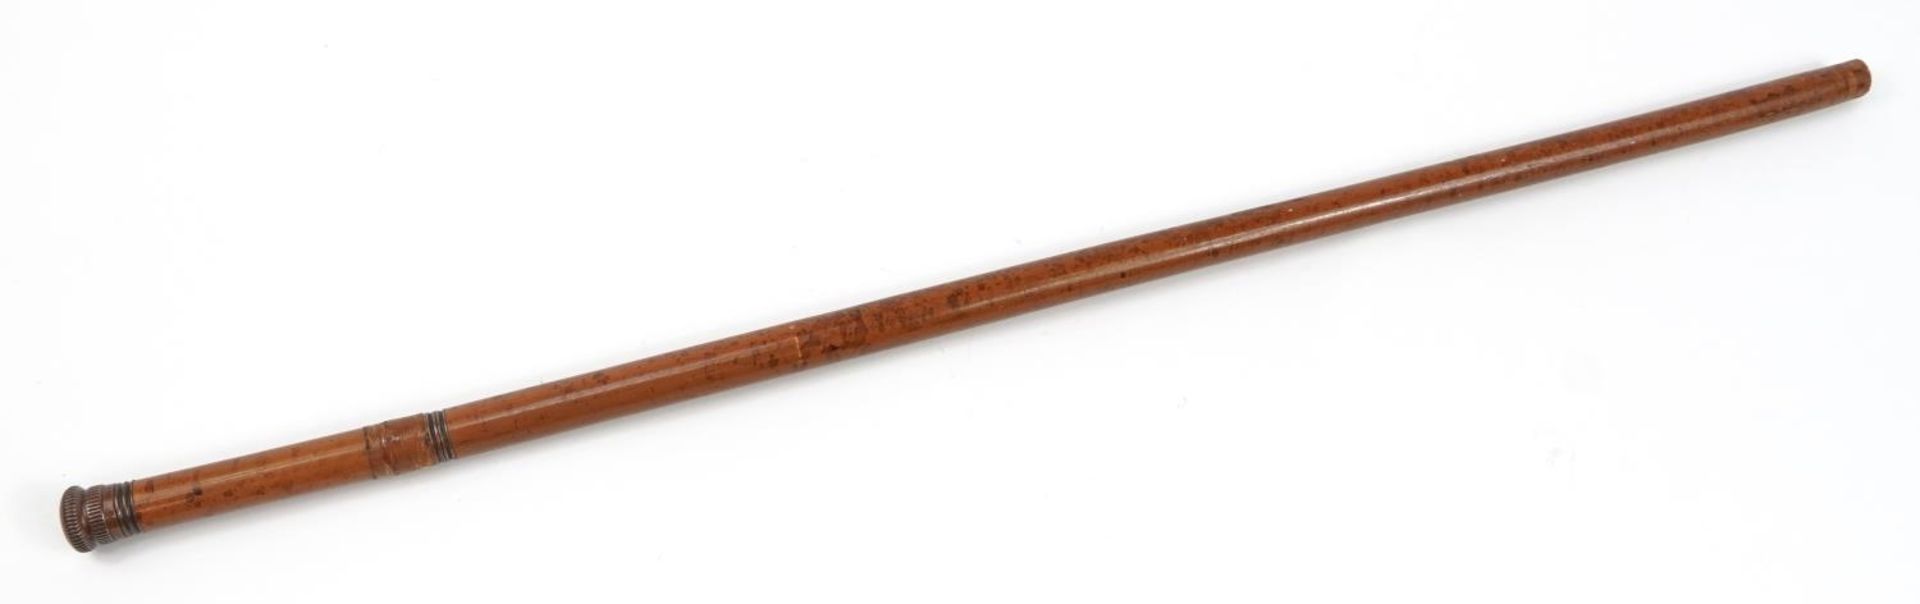 Wooden prohibition walking stick housing a glass vessel, 89cm in length - Image 3 of 3